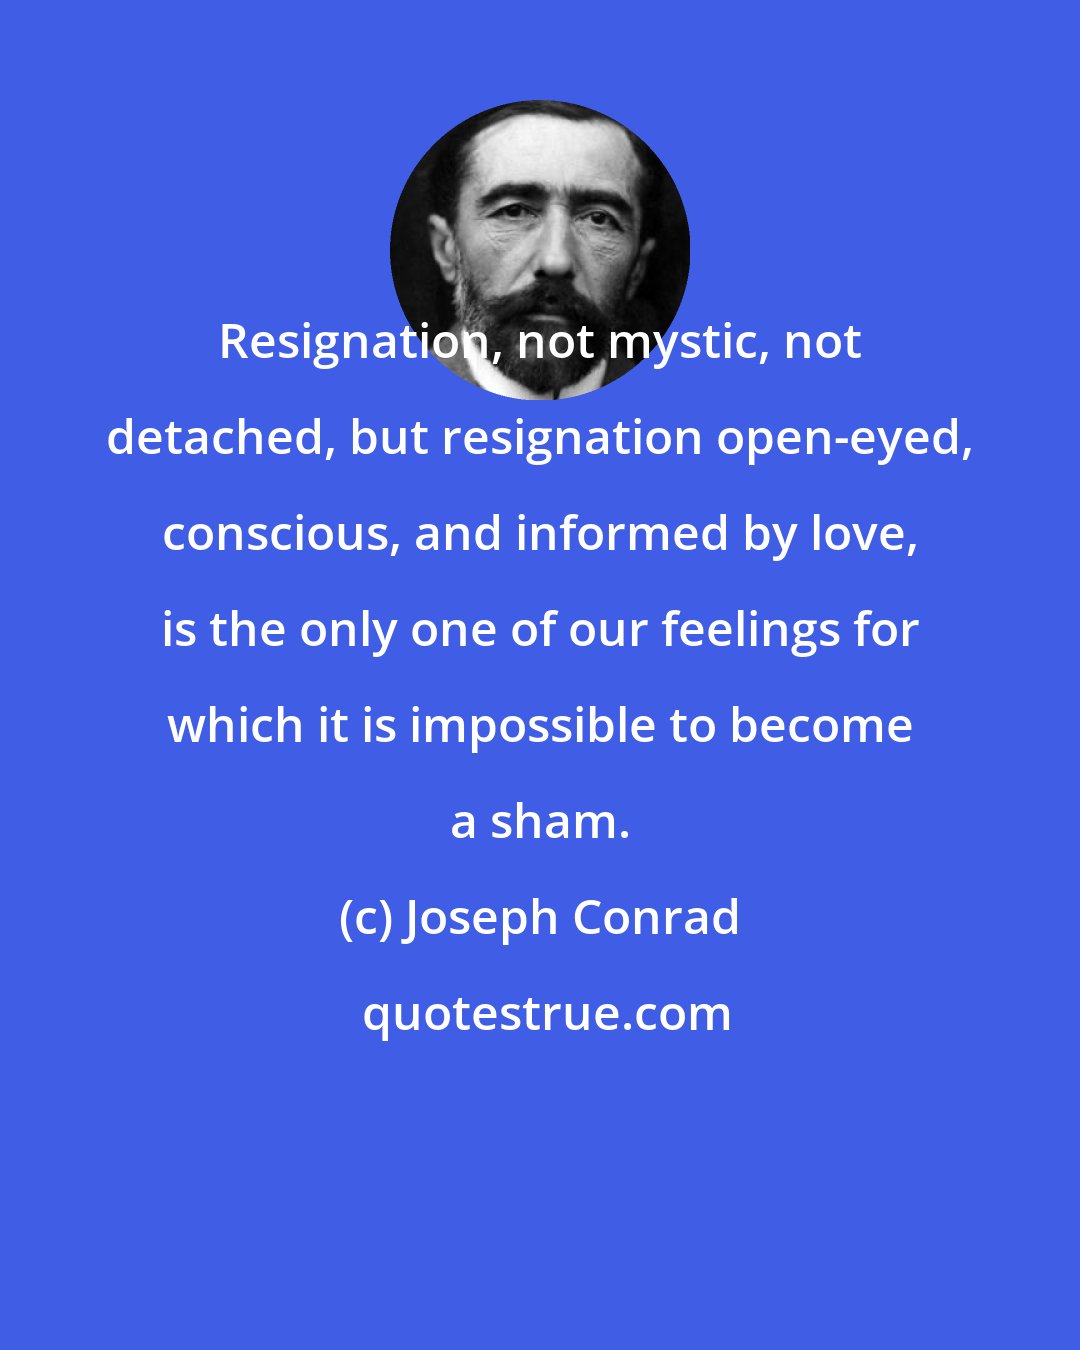 Joseph Conrad: Resignation, not mystic, not detached, but resignation open-eyed, conscious, and informed by love, is the only one of our feelings for which it is impossible to become a sham.